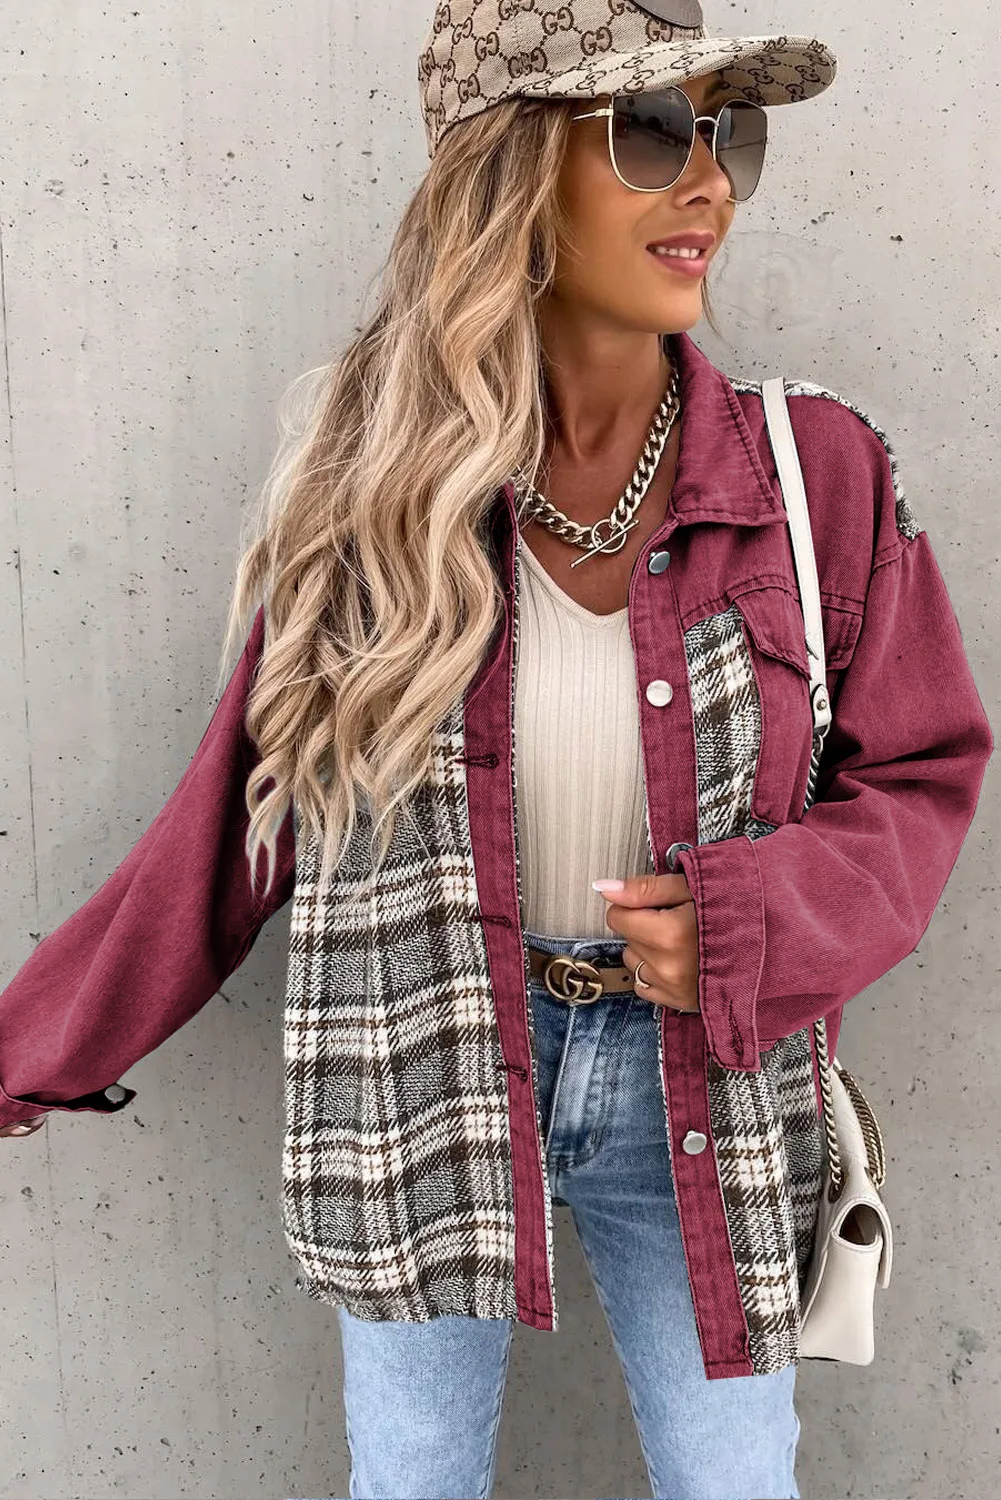 Dear-Lover Western Clothing Distressed Plaid Patchwork Pockets Ladies Outdoor Jean Denim Jacket For Women